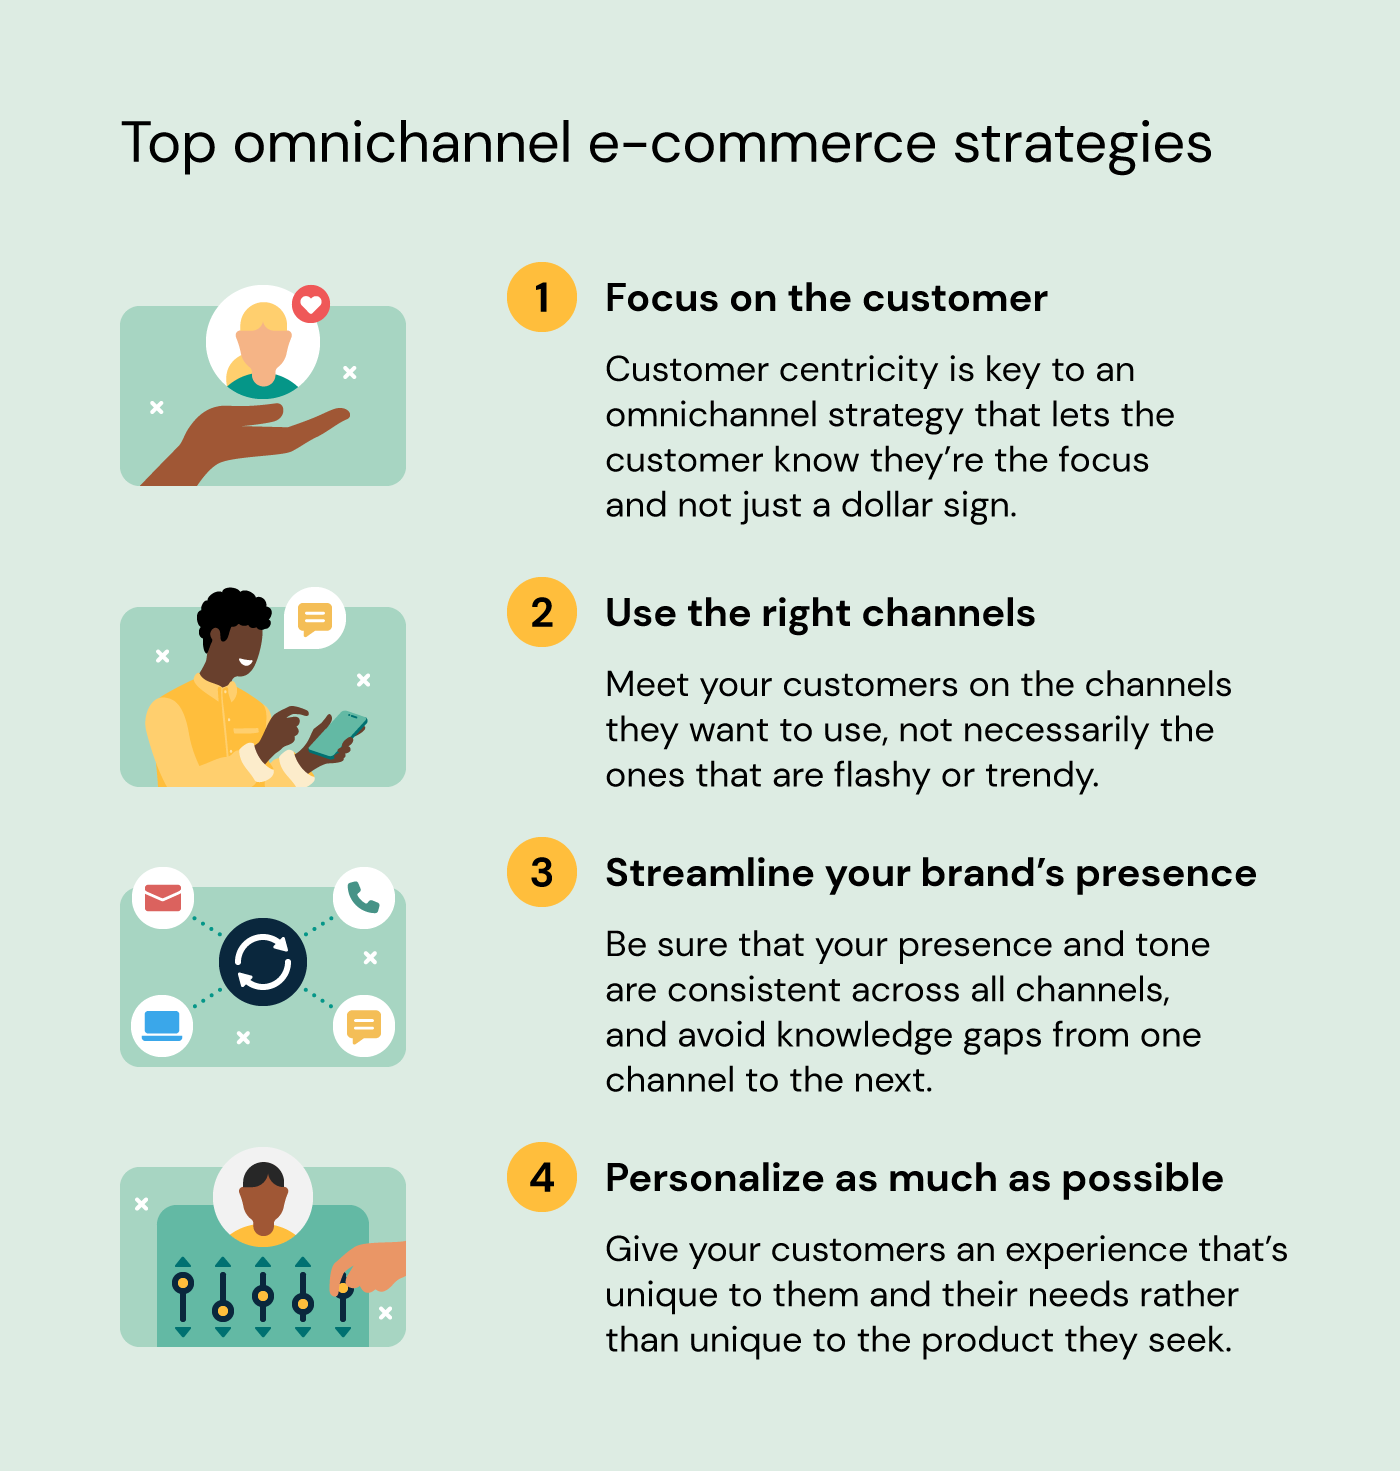 Top omnichannel e-commerce strategies: 1-focus on the customer; 2-use the right channels; 3-streamline your brand's presence; 4-personalize as much as possible